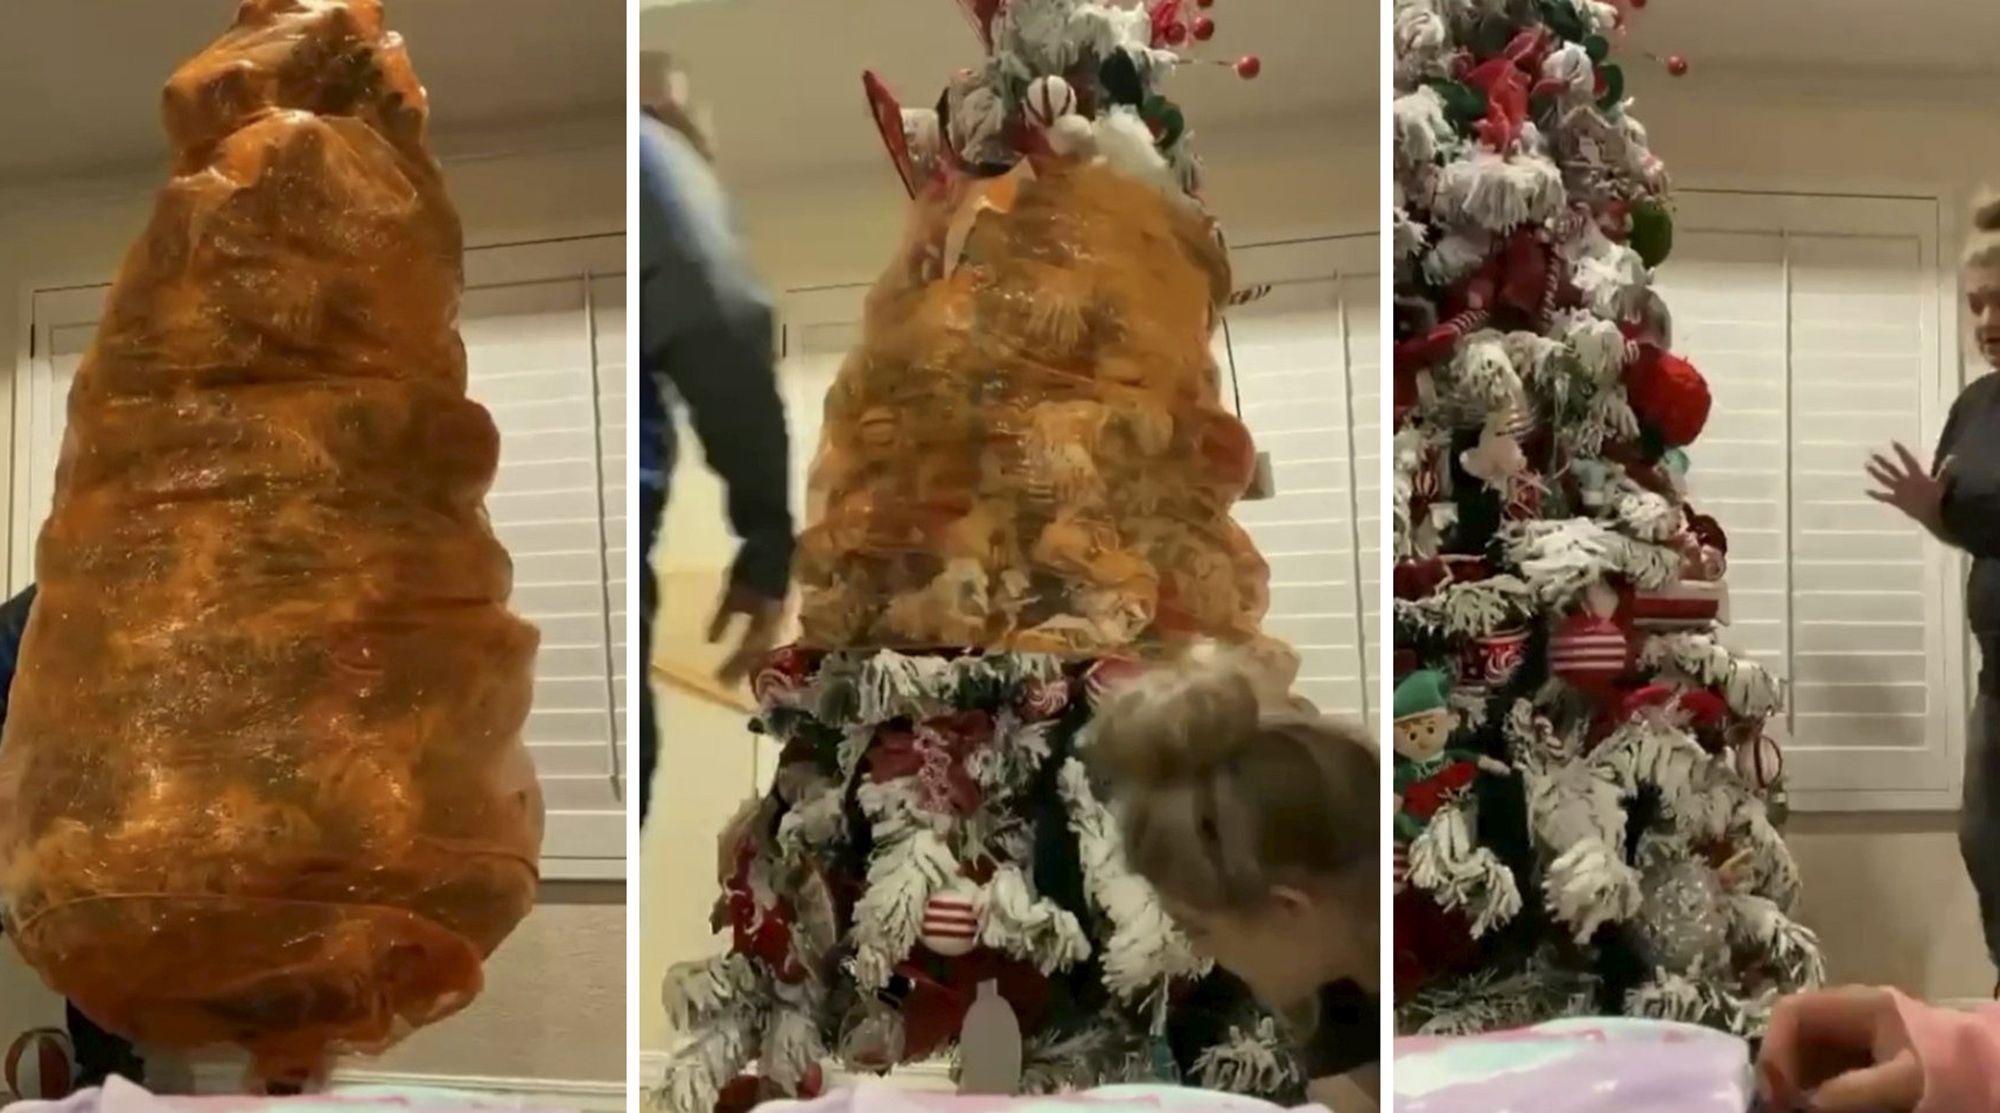 Video grab of the moment a mom unwrapped her Christmas tree in cellophane that held last year's decorations in place - to preserve the baubles hung by her teenage son weeks before he died.